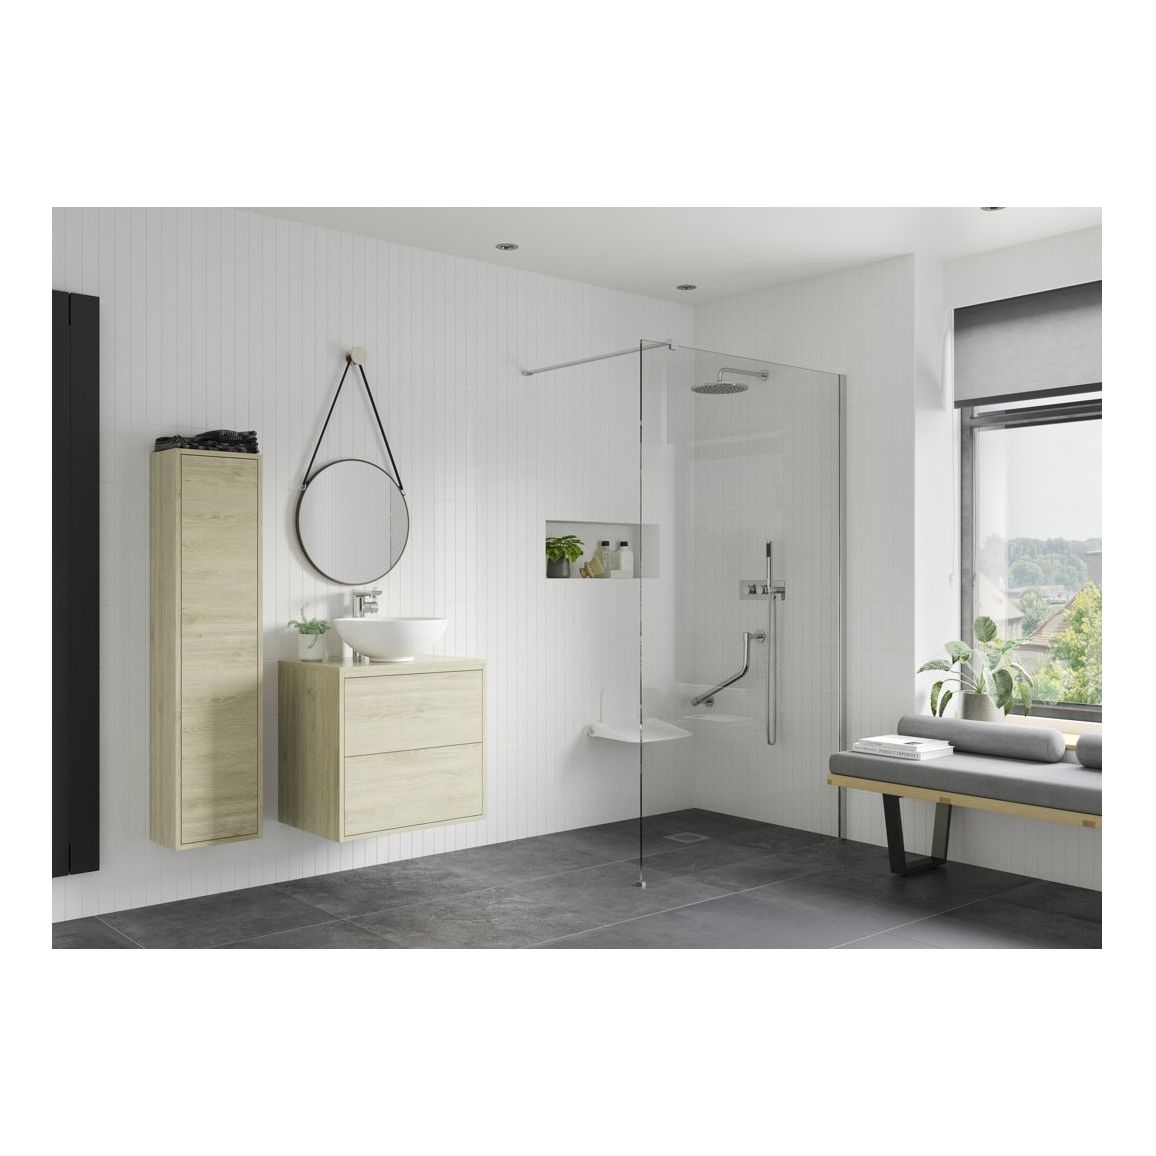 Montague 1200mm Wetroom Panel & Floor-to-Ceiling Pole - Chrome